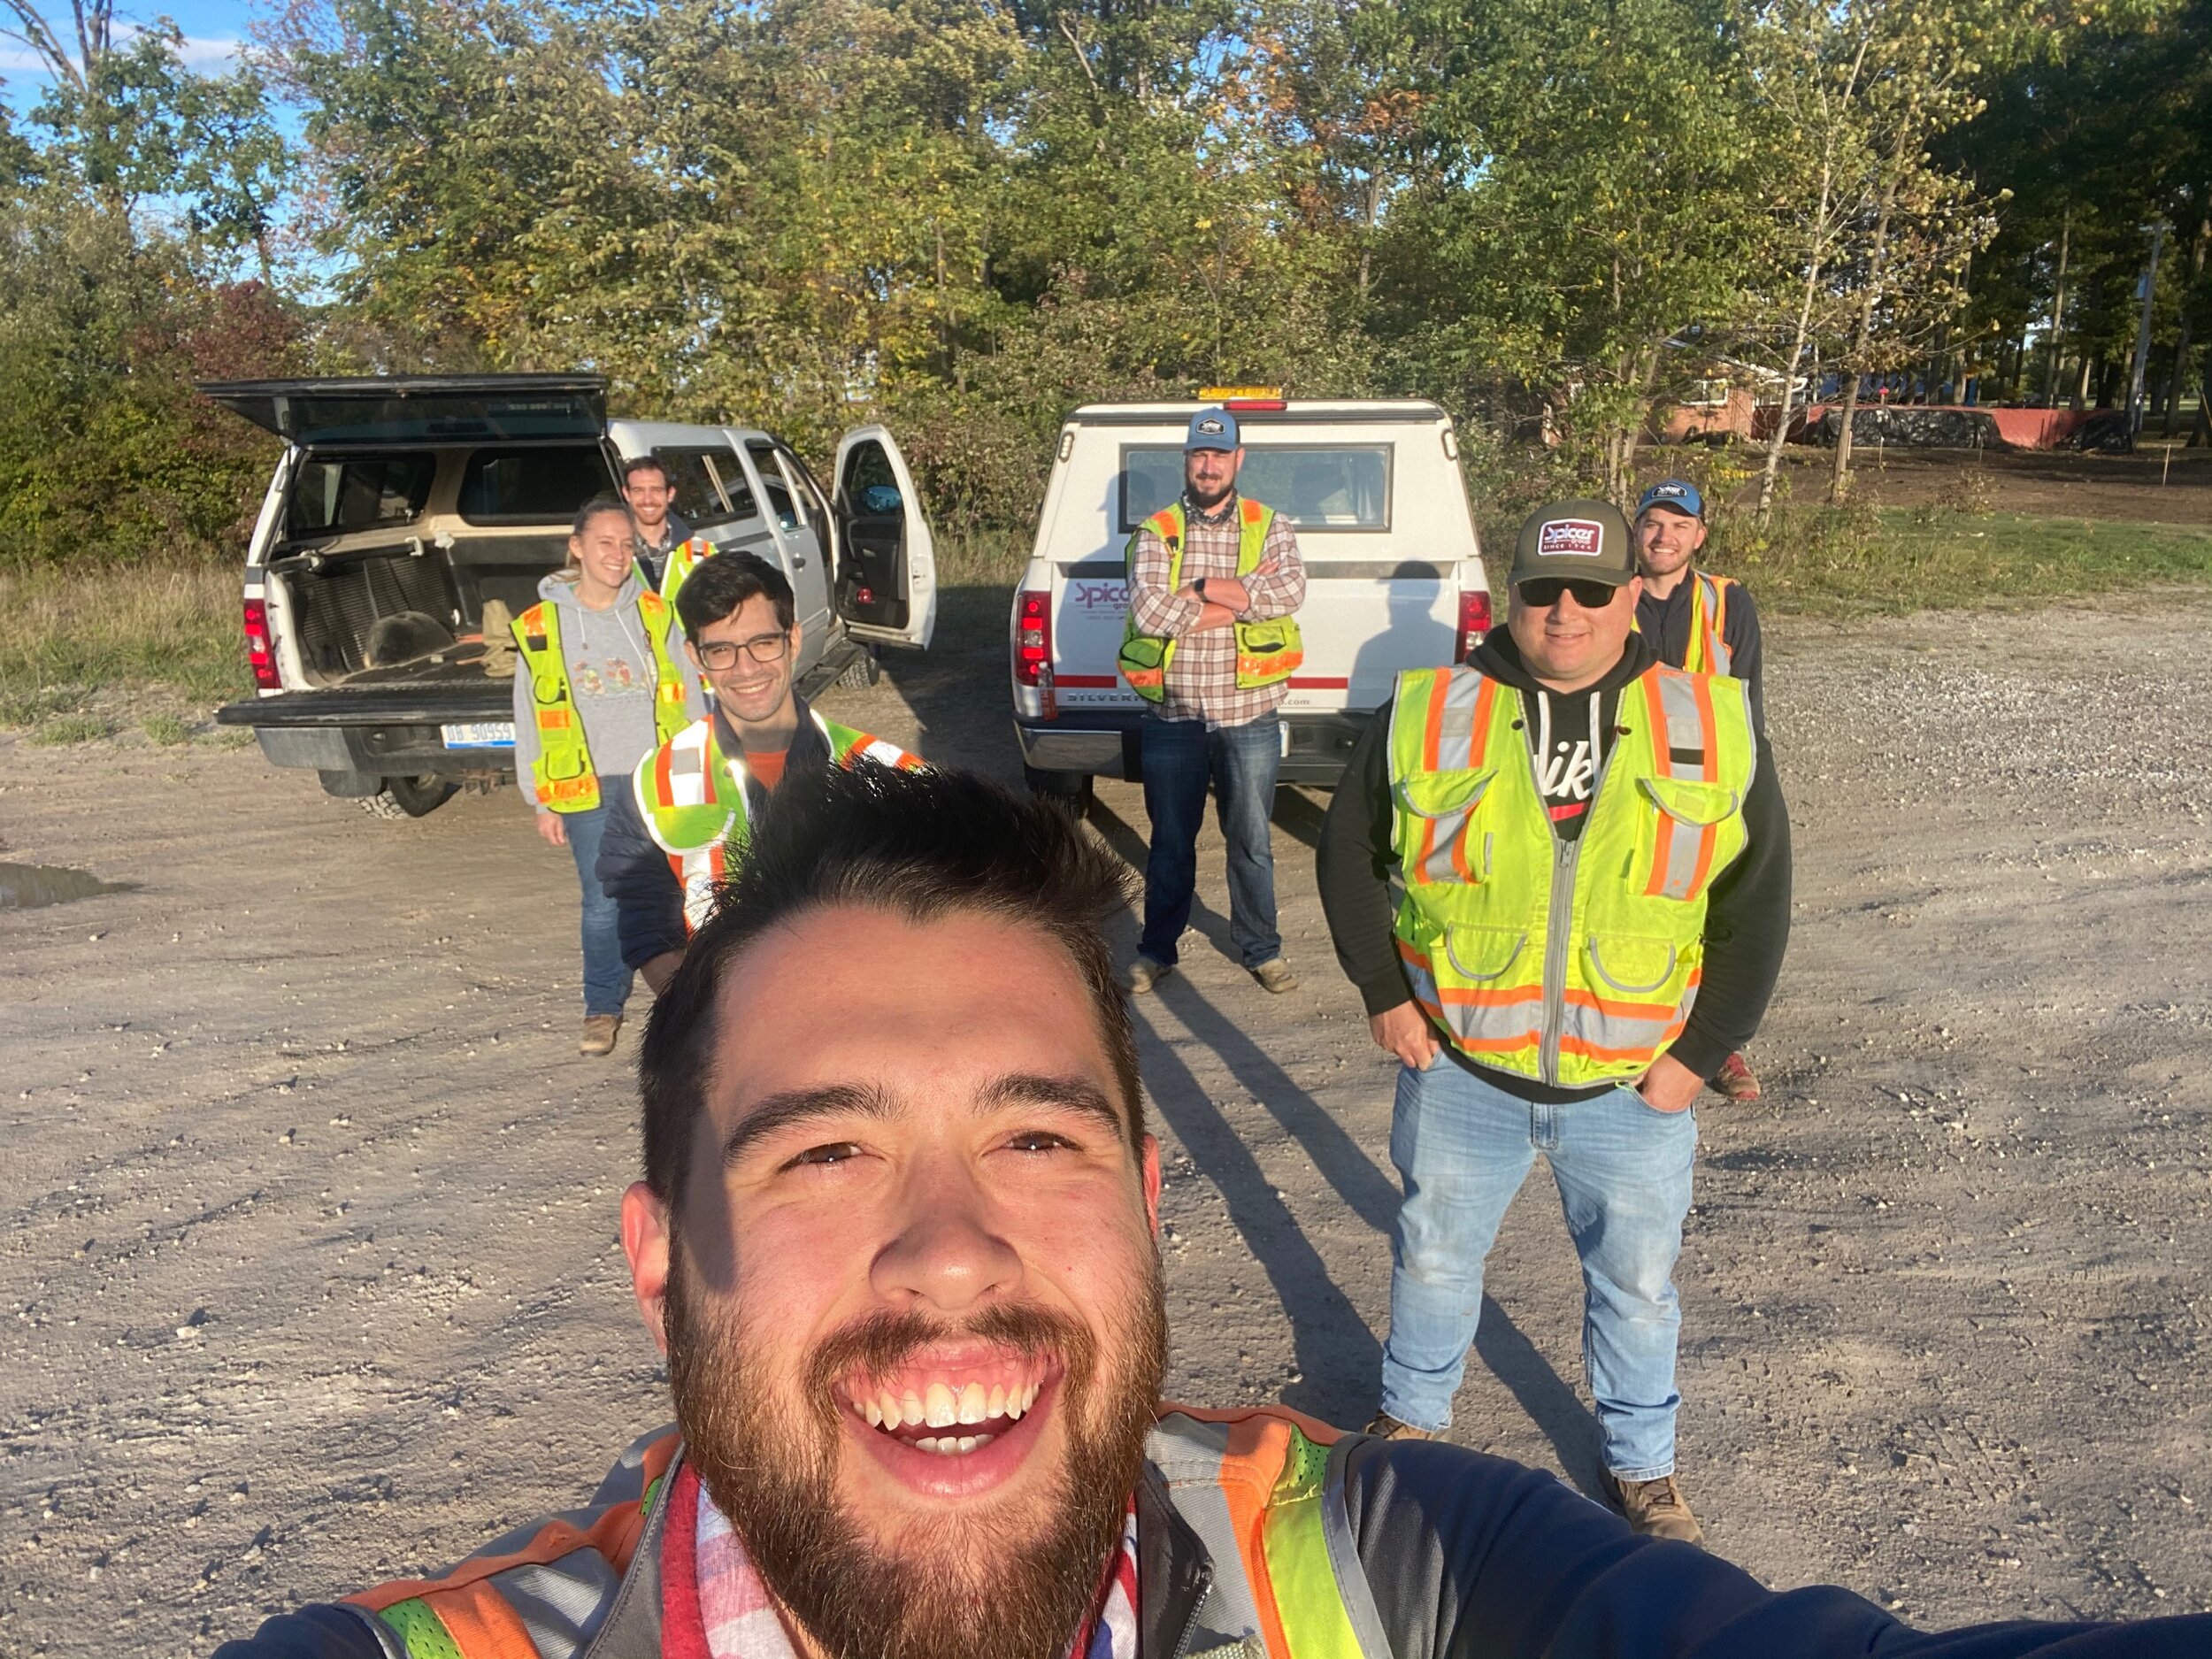  Design Engineer Kris Koko (front) and staff members from our Dundee Office during an MDOT Adopt-a-Highway clean up event.  